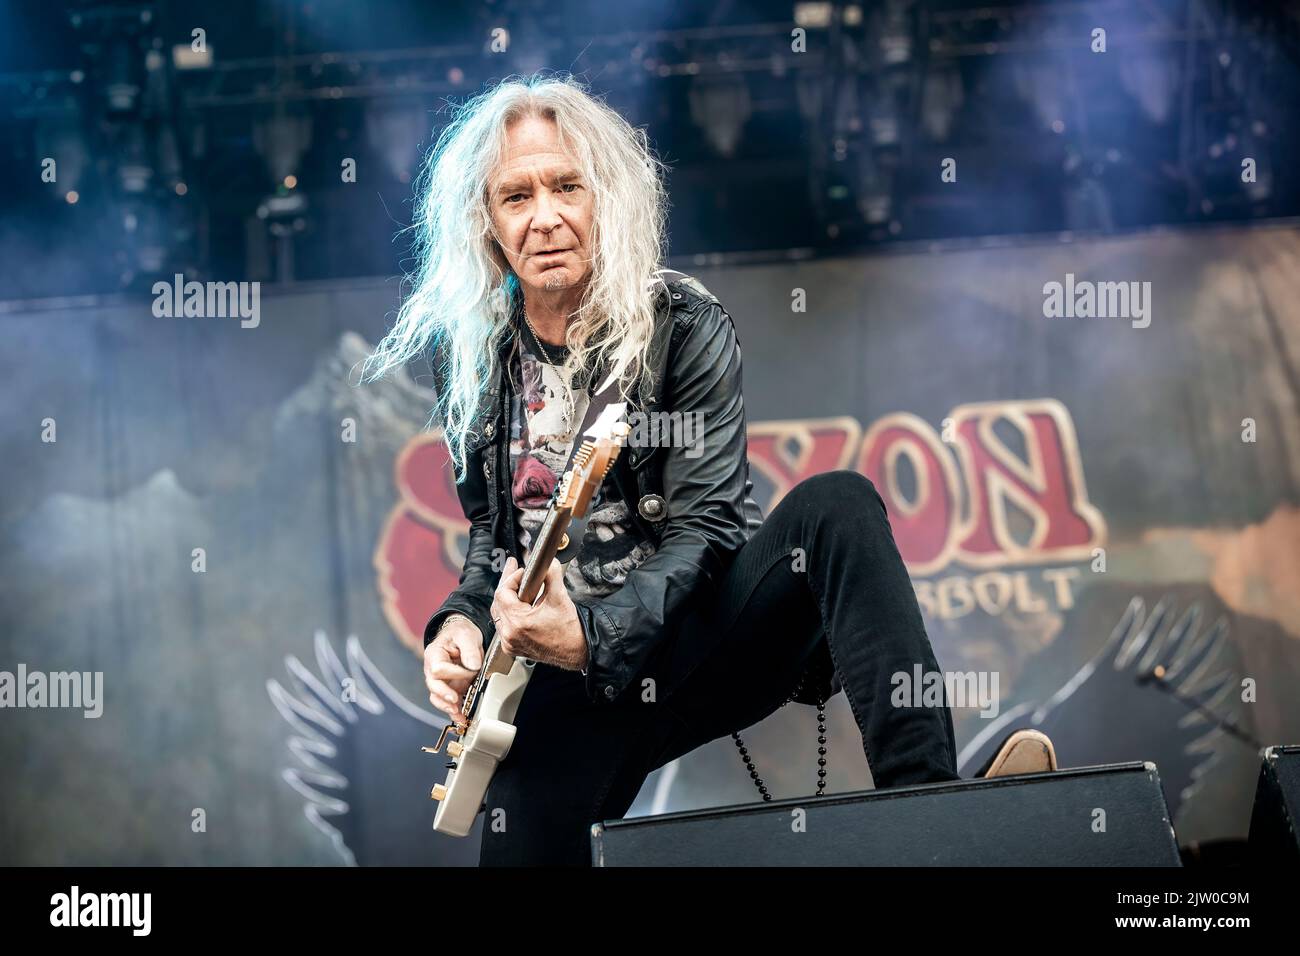 Solvesborg, Sweden. 10th, June 2022. The British heavy metal band Saxon performs a live concert during the Swedish music festival Sweden Rock Festival 2022 in Solvesborg. Here guitarist Doug Scarratt is seen live on stage. (Photo credit: Gonzales Photo - Terje Dokken). Stock Photo